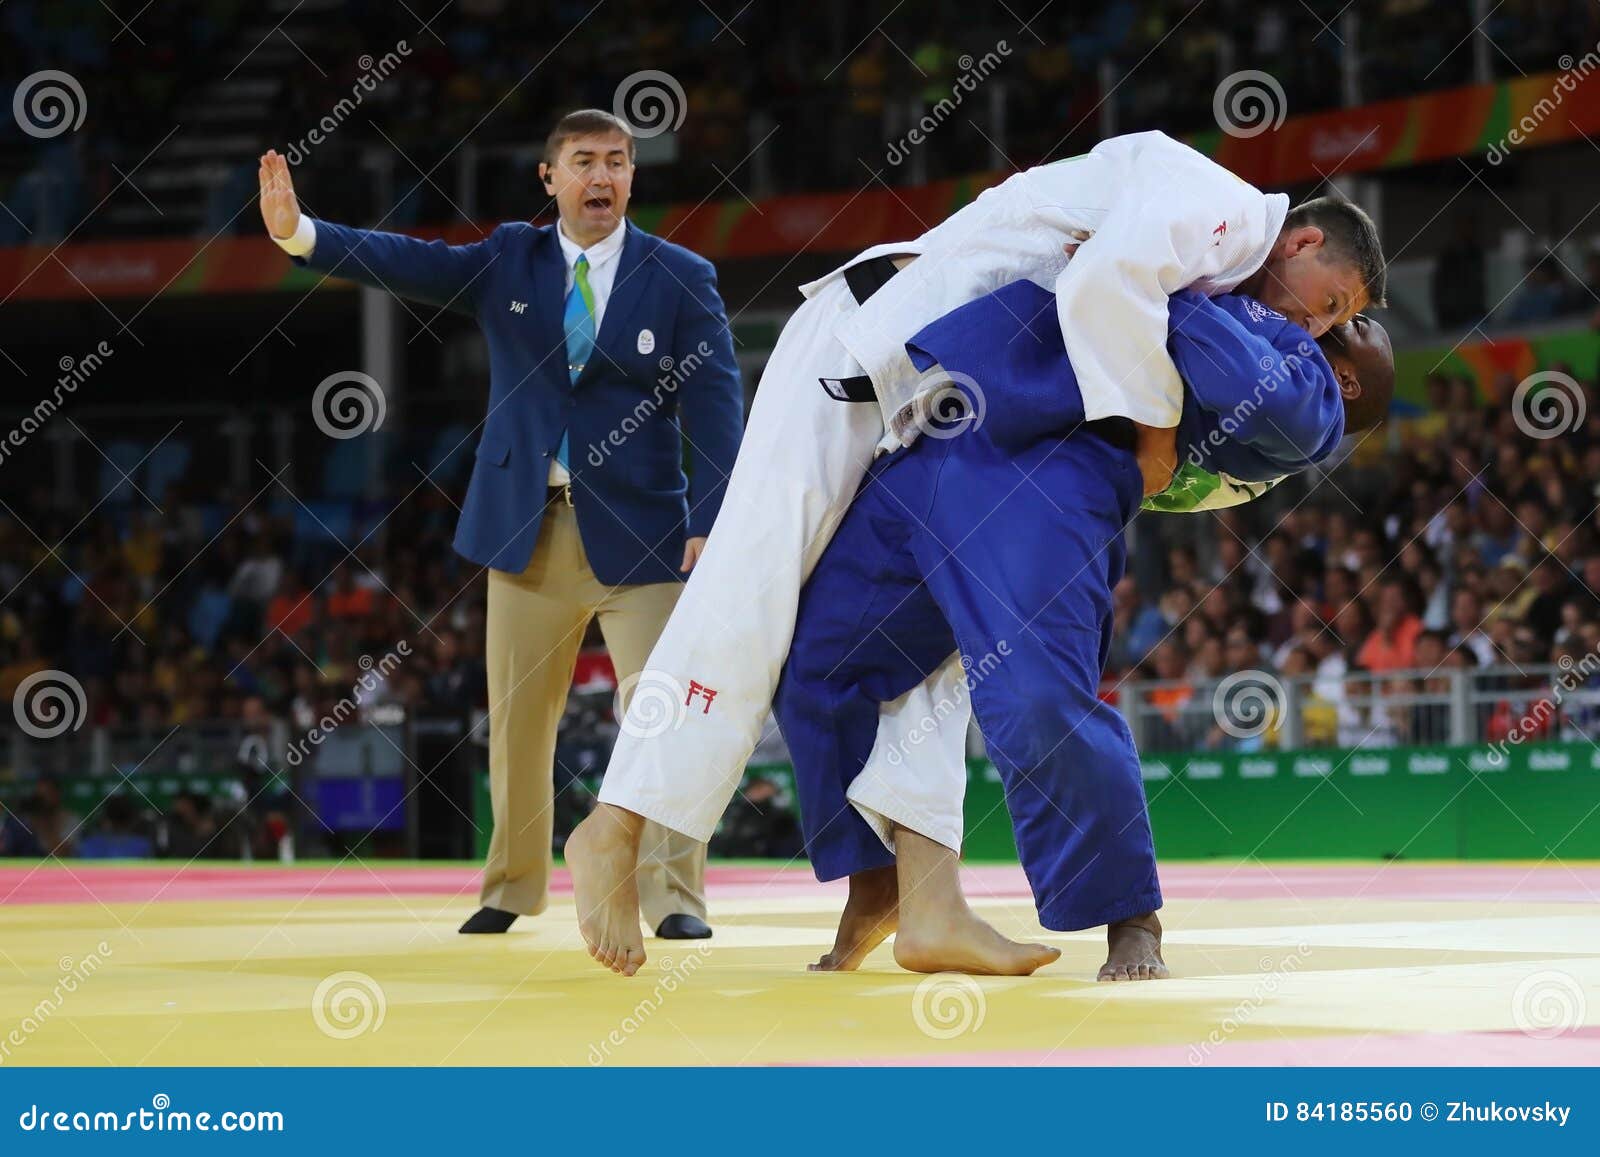 Olympic Champion Czech Republic Judoka Lukas Krpalek In White After Victory Against Jorge Fonseca Of Portugal Editorial Image Image Of Janeiro Fonseca 84185560